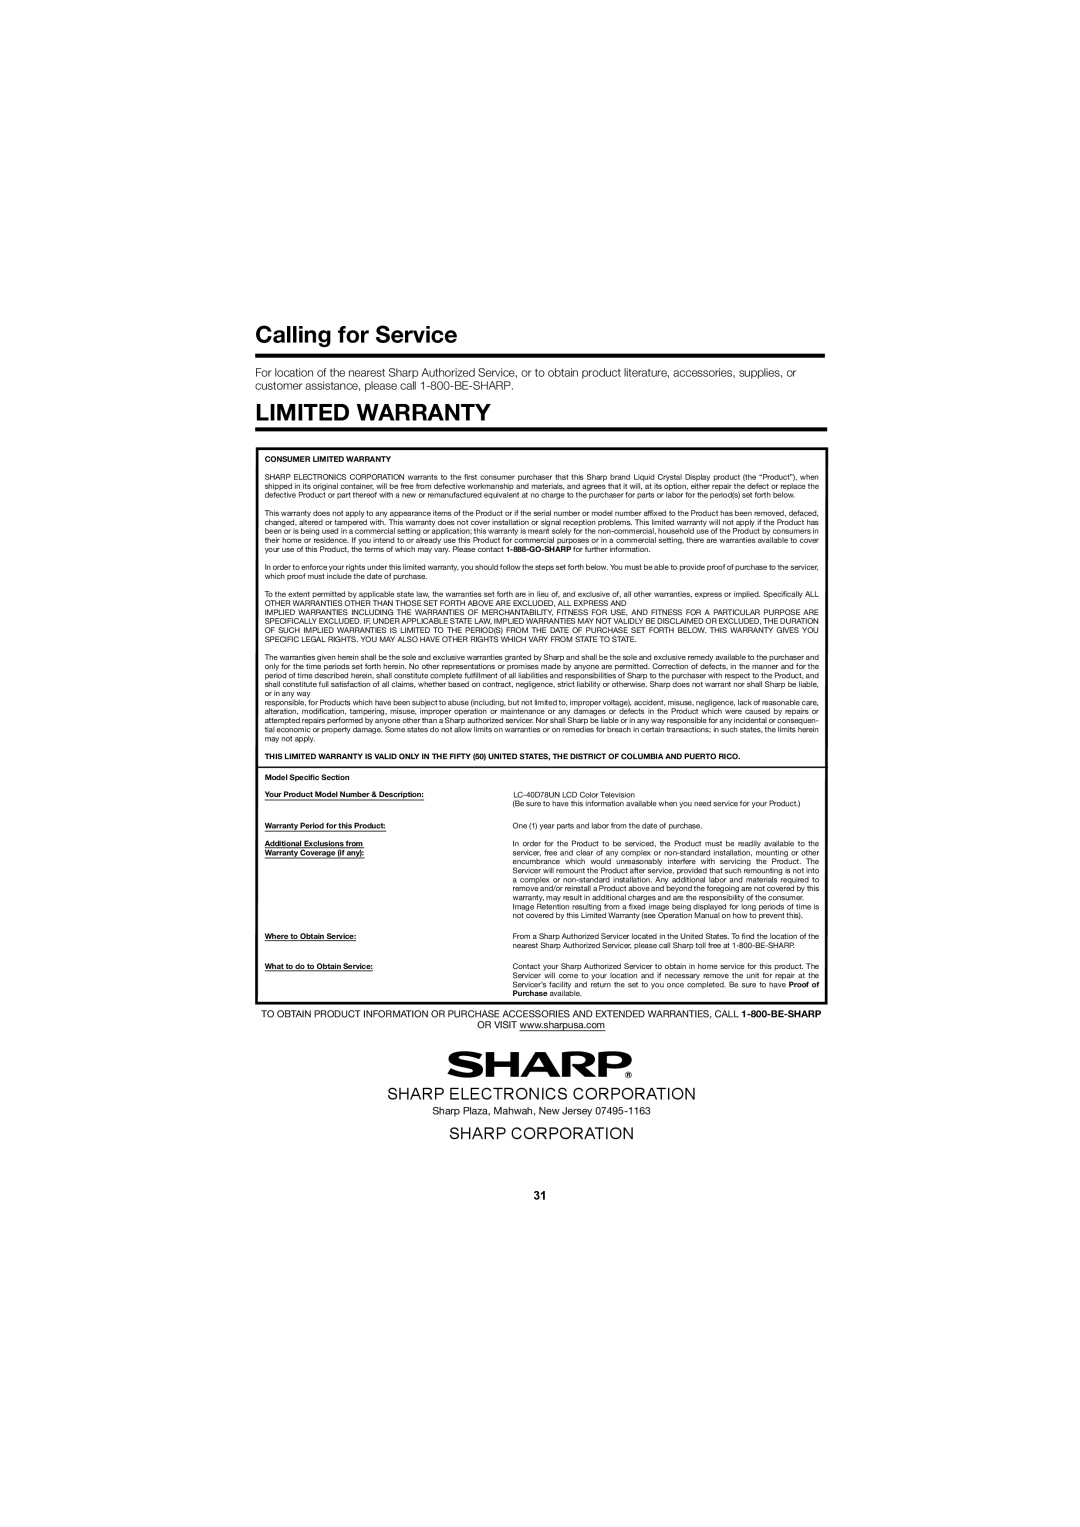 Sharp LC-40D78UN operation manual Calling for Service, Limited Warranty, Sharp Electronics Corporation, Sharp Corporation 